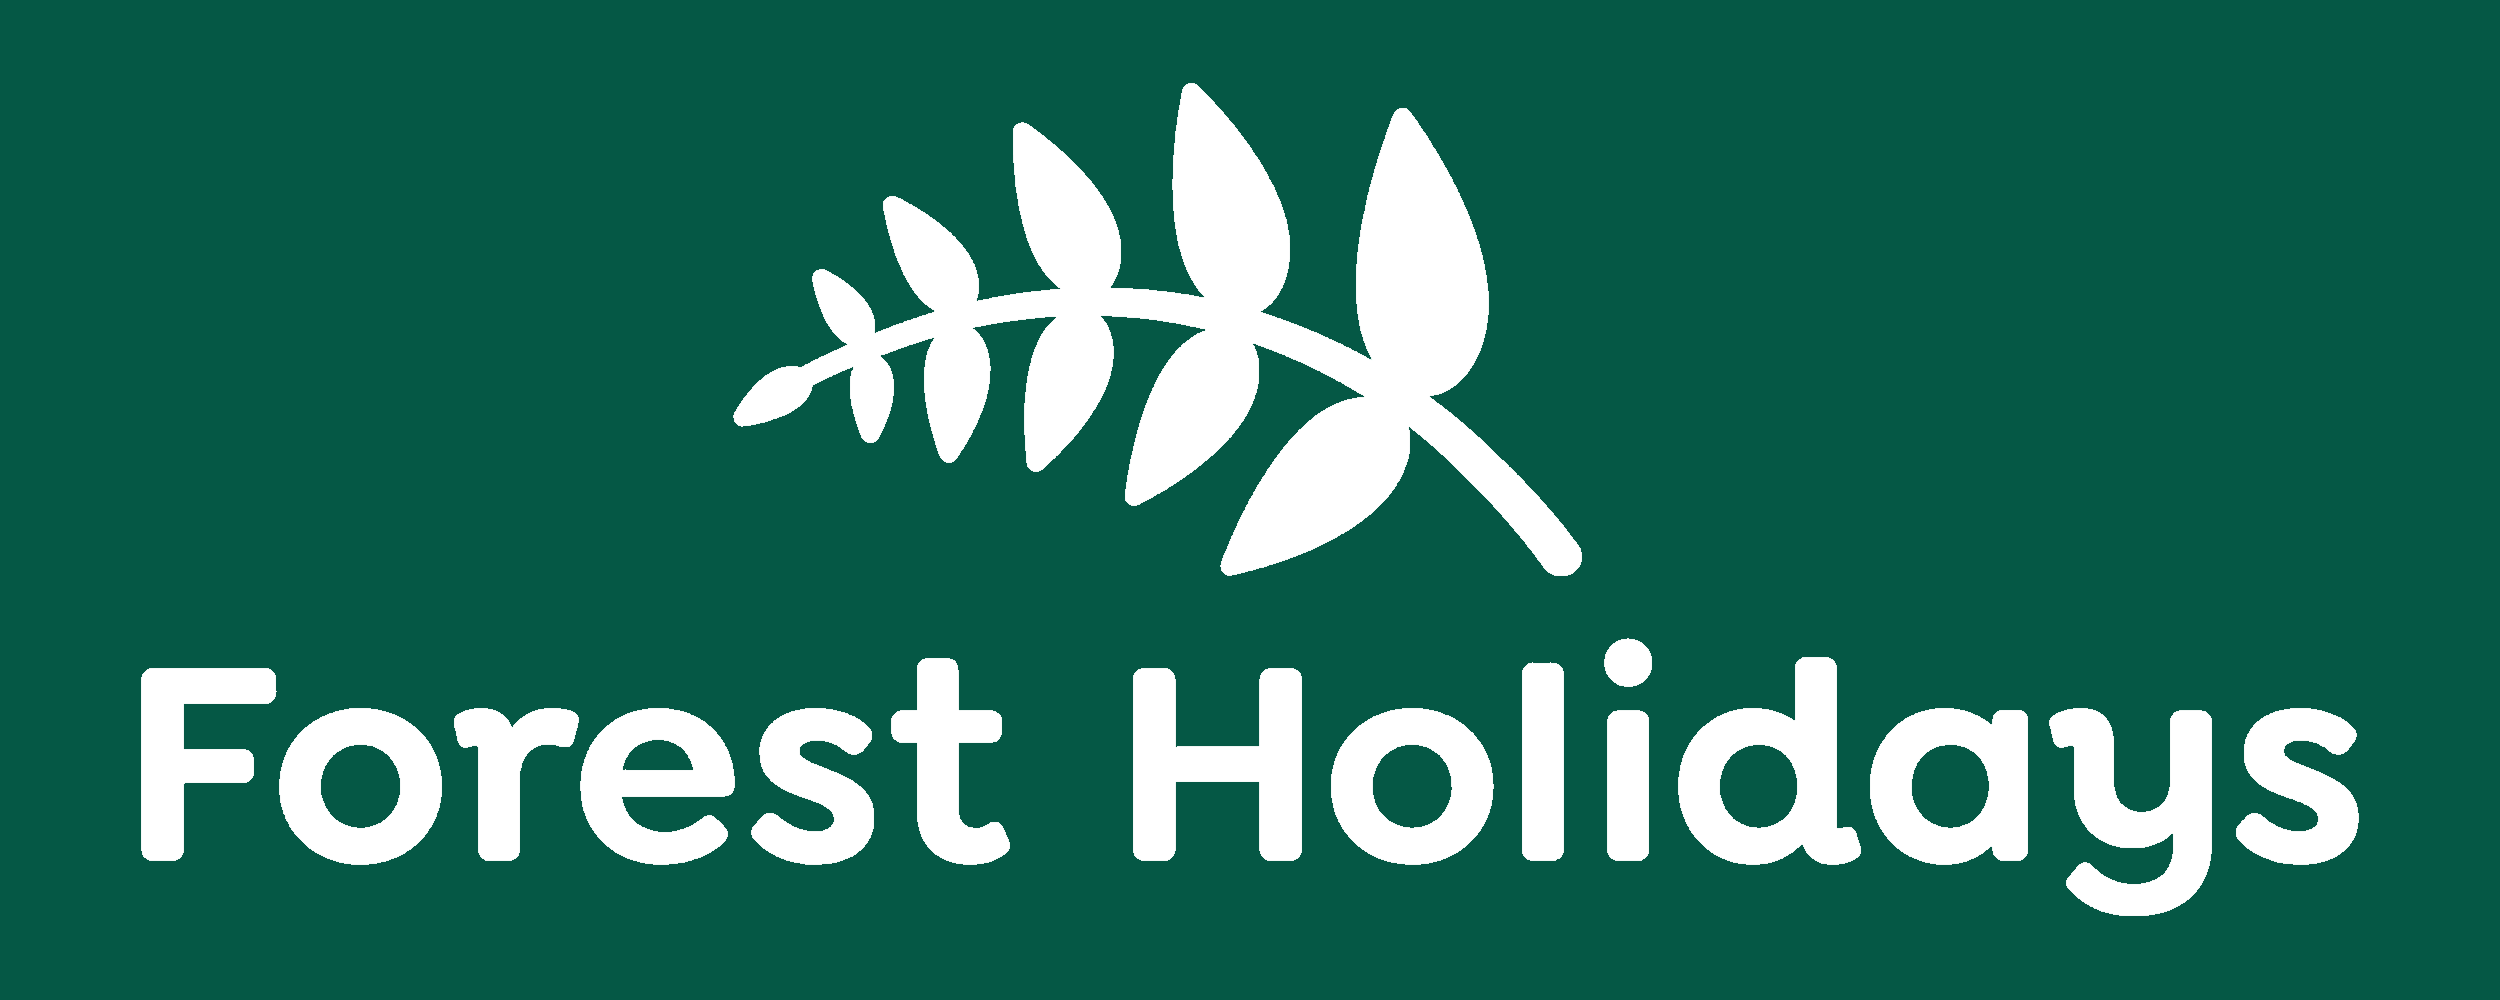 Forest Holidays Coupons & Promo Codes